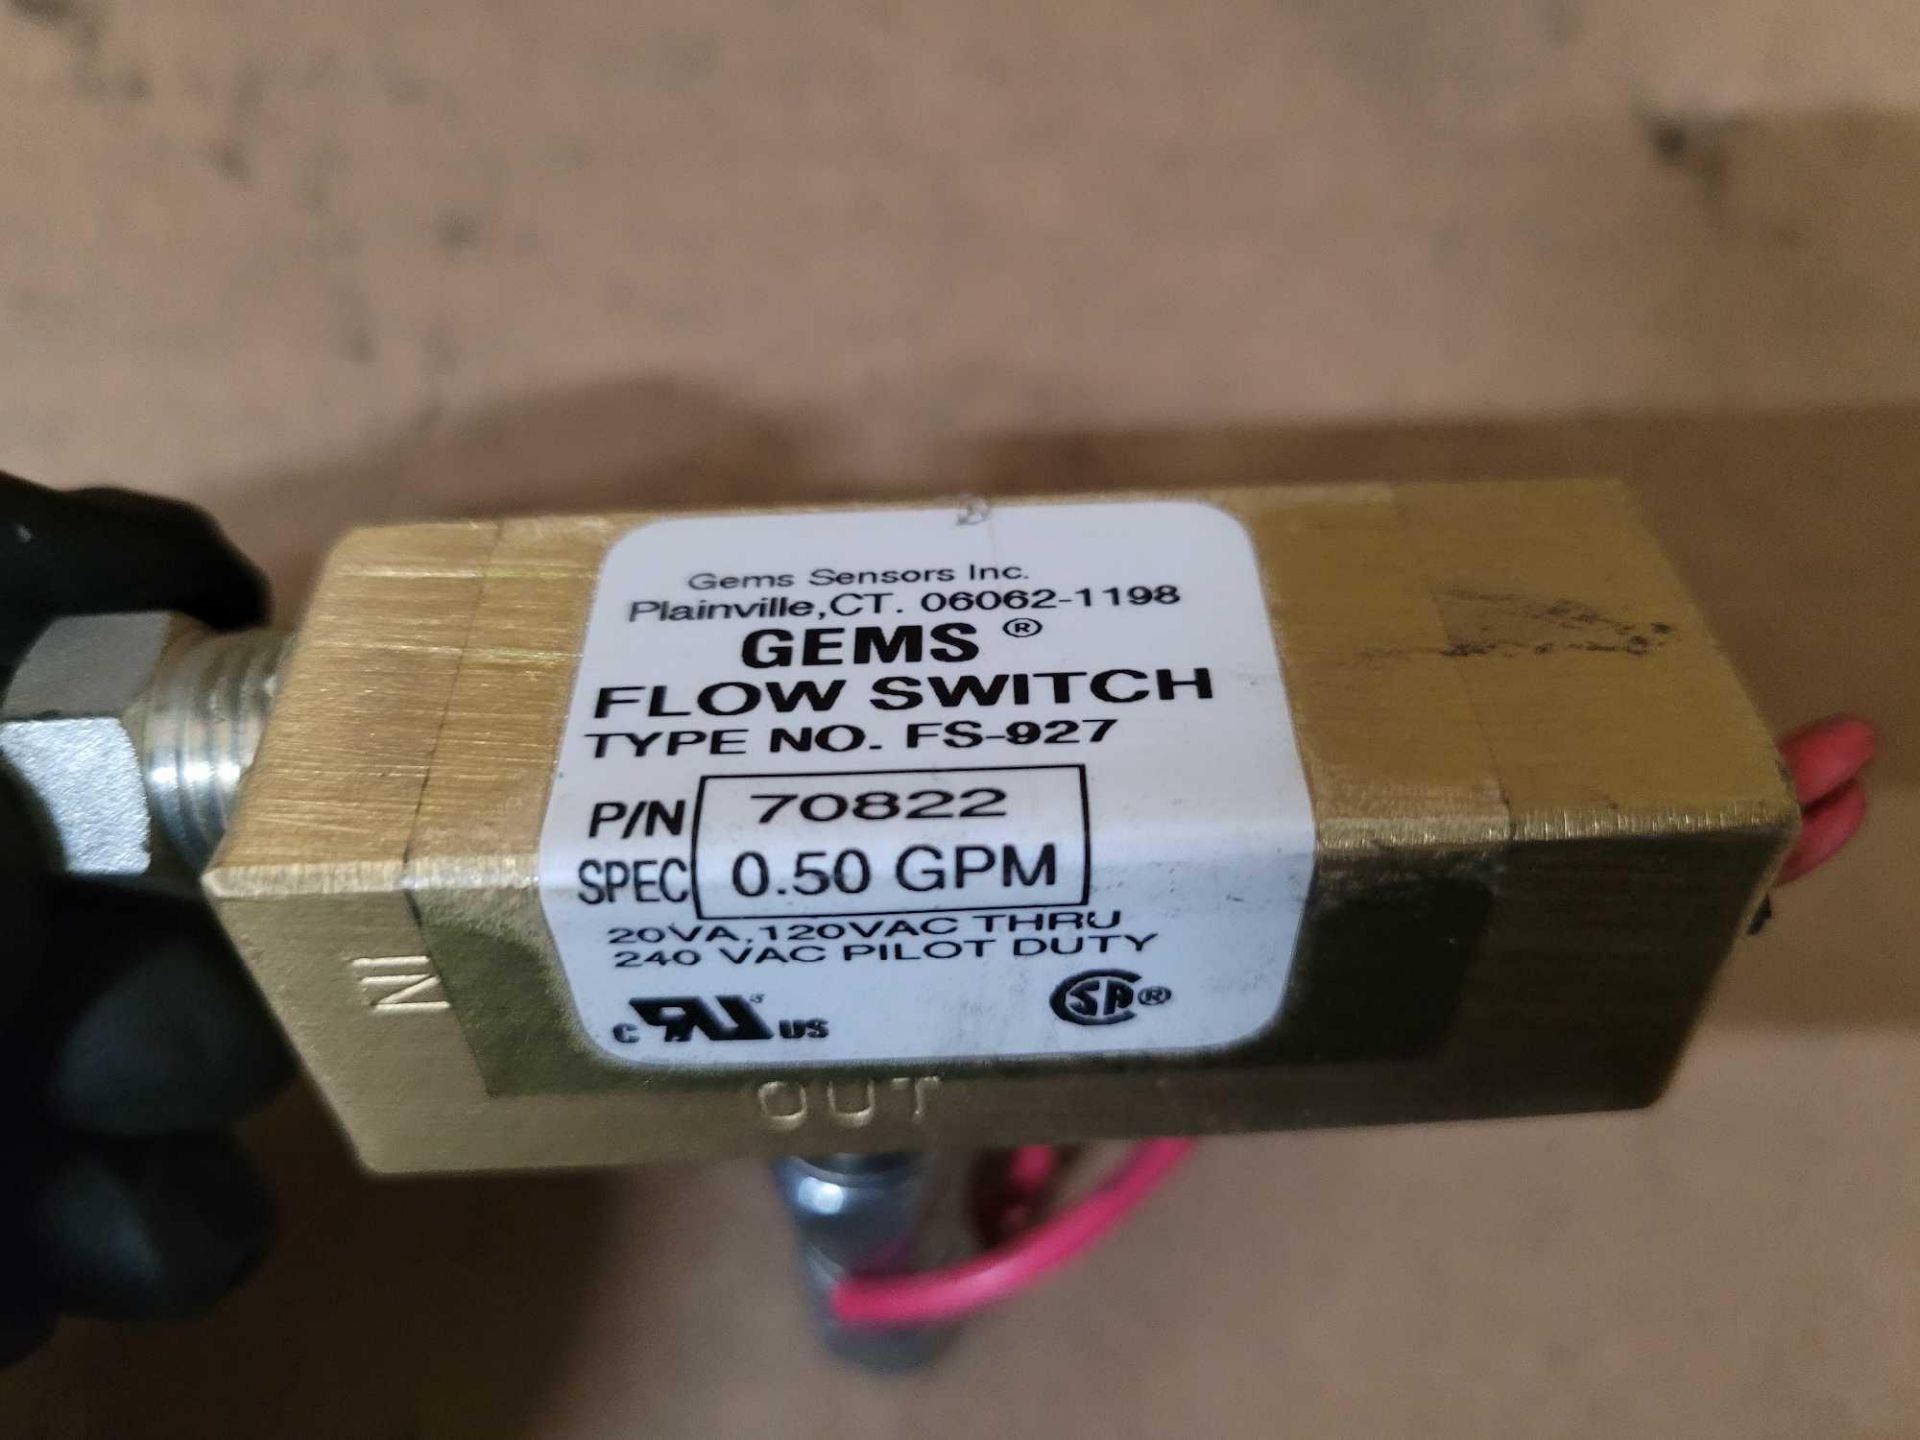 LOT OF 9 GEMS FS-927 FLOW SWITCH - Image 2 of 2